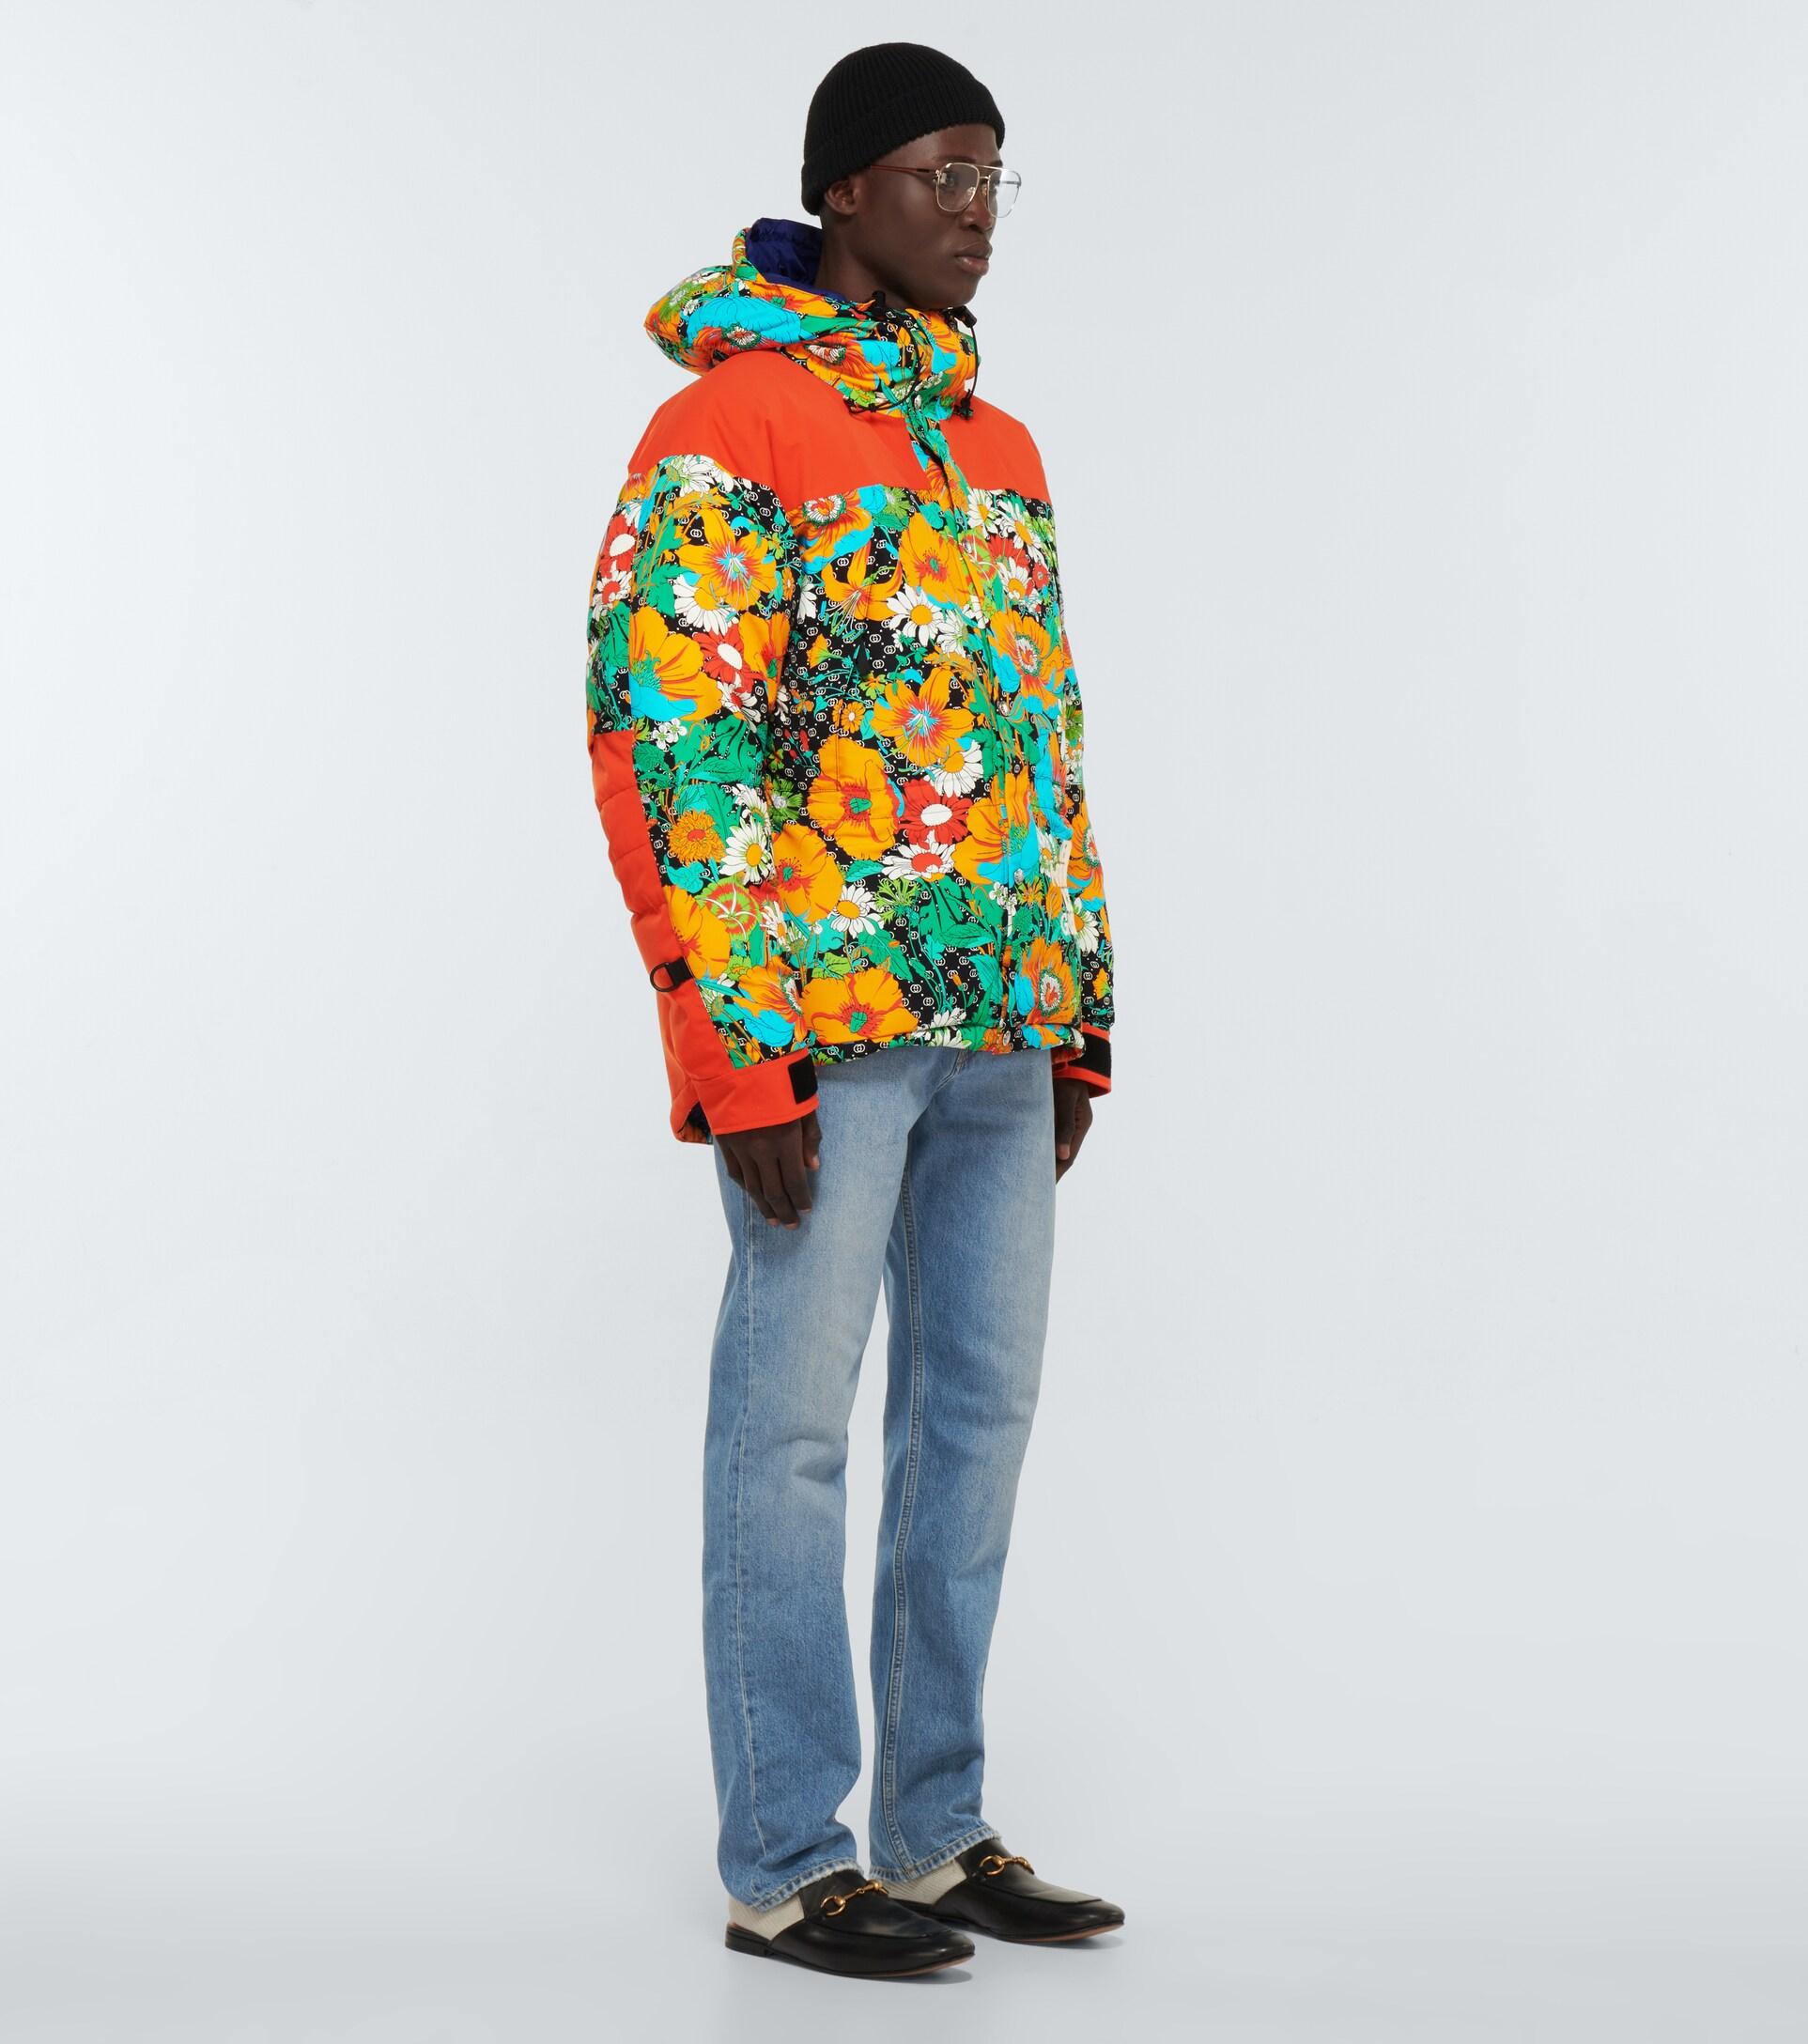 The North Face x Gucci 700 Fill Down Forest Jacket